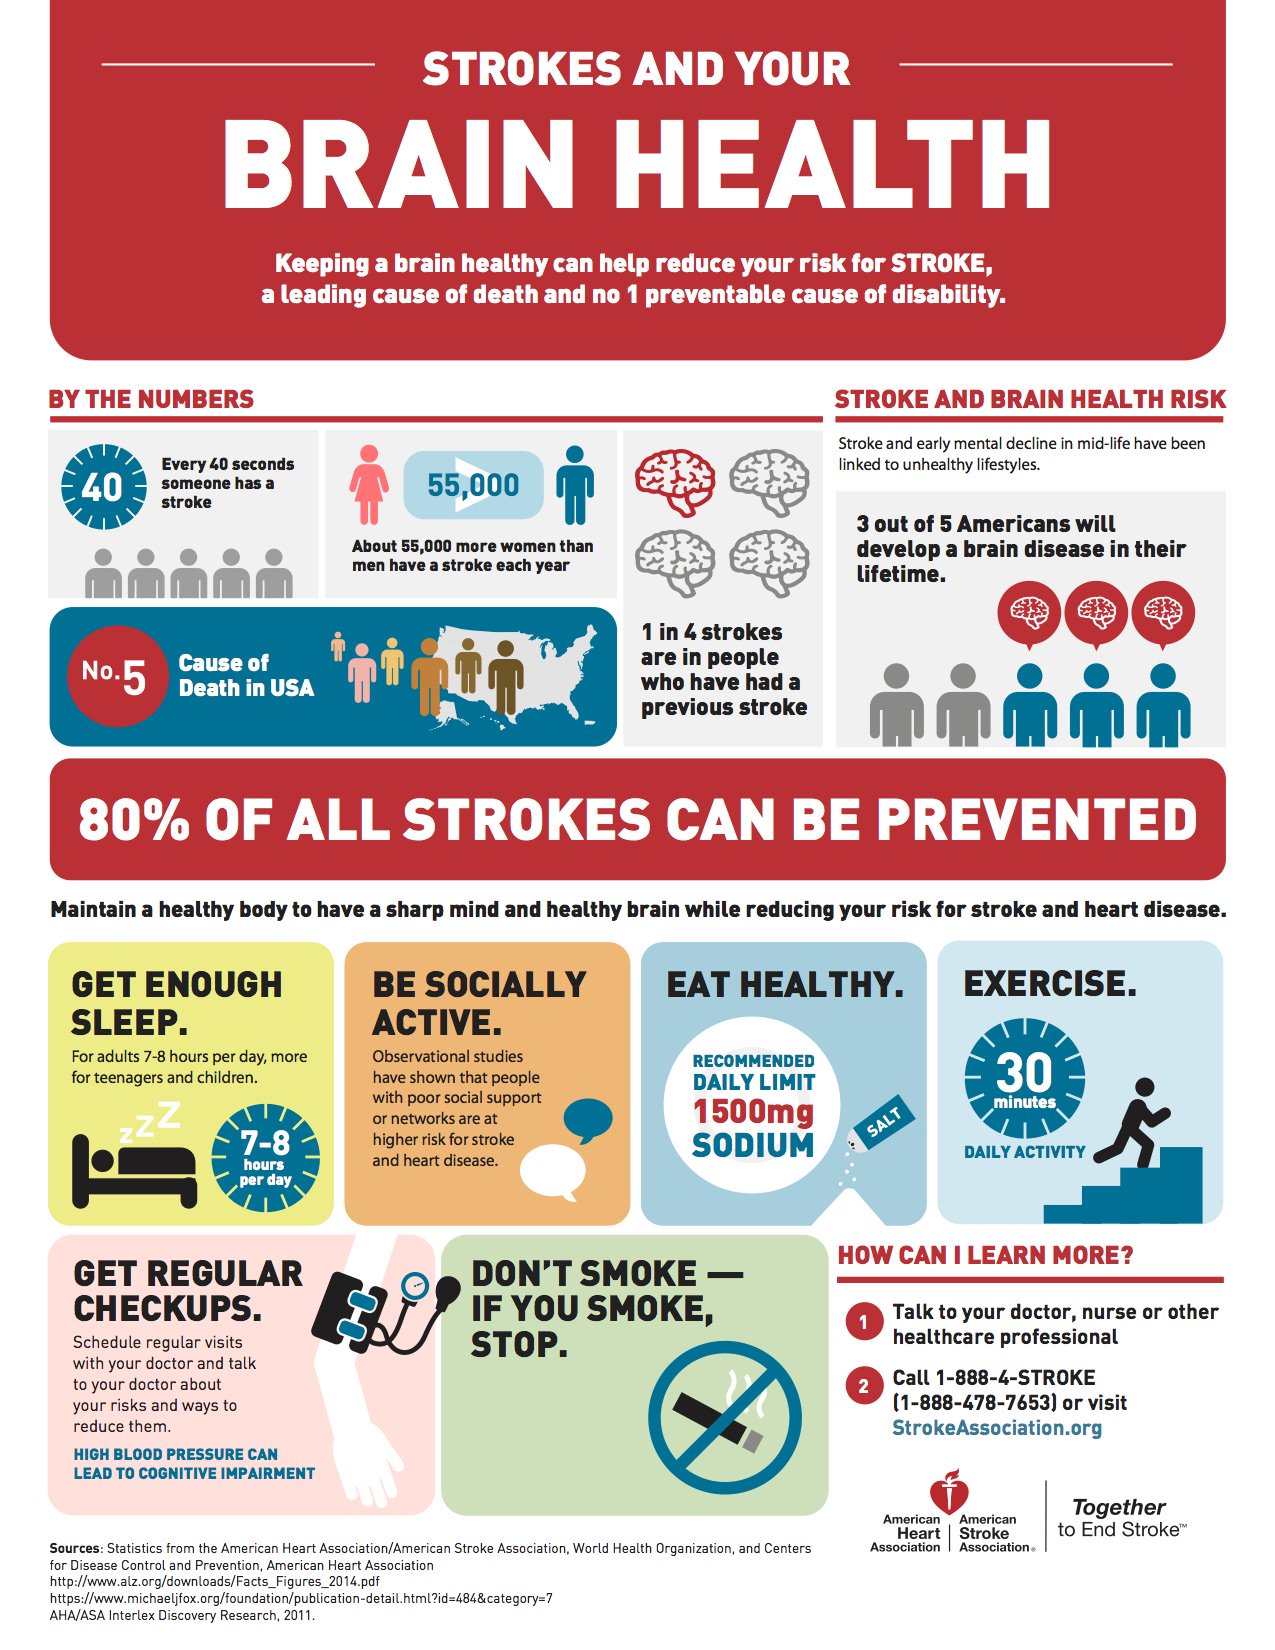 Strokes and your Brain Health in United States